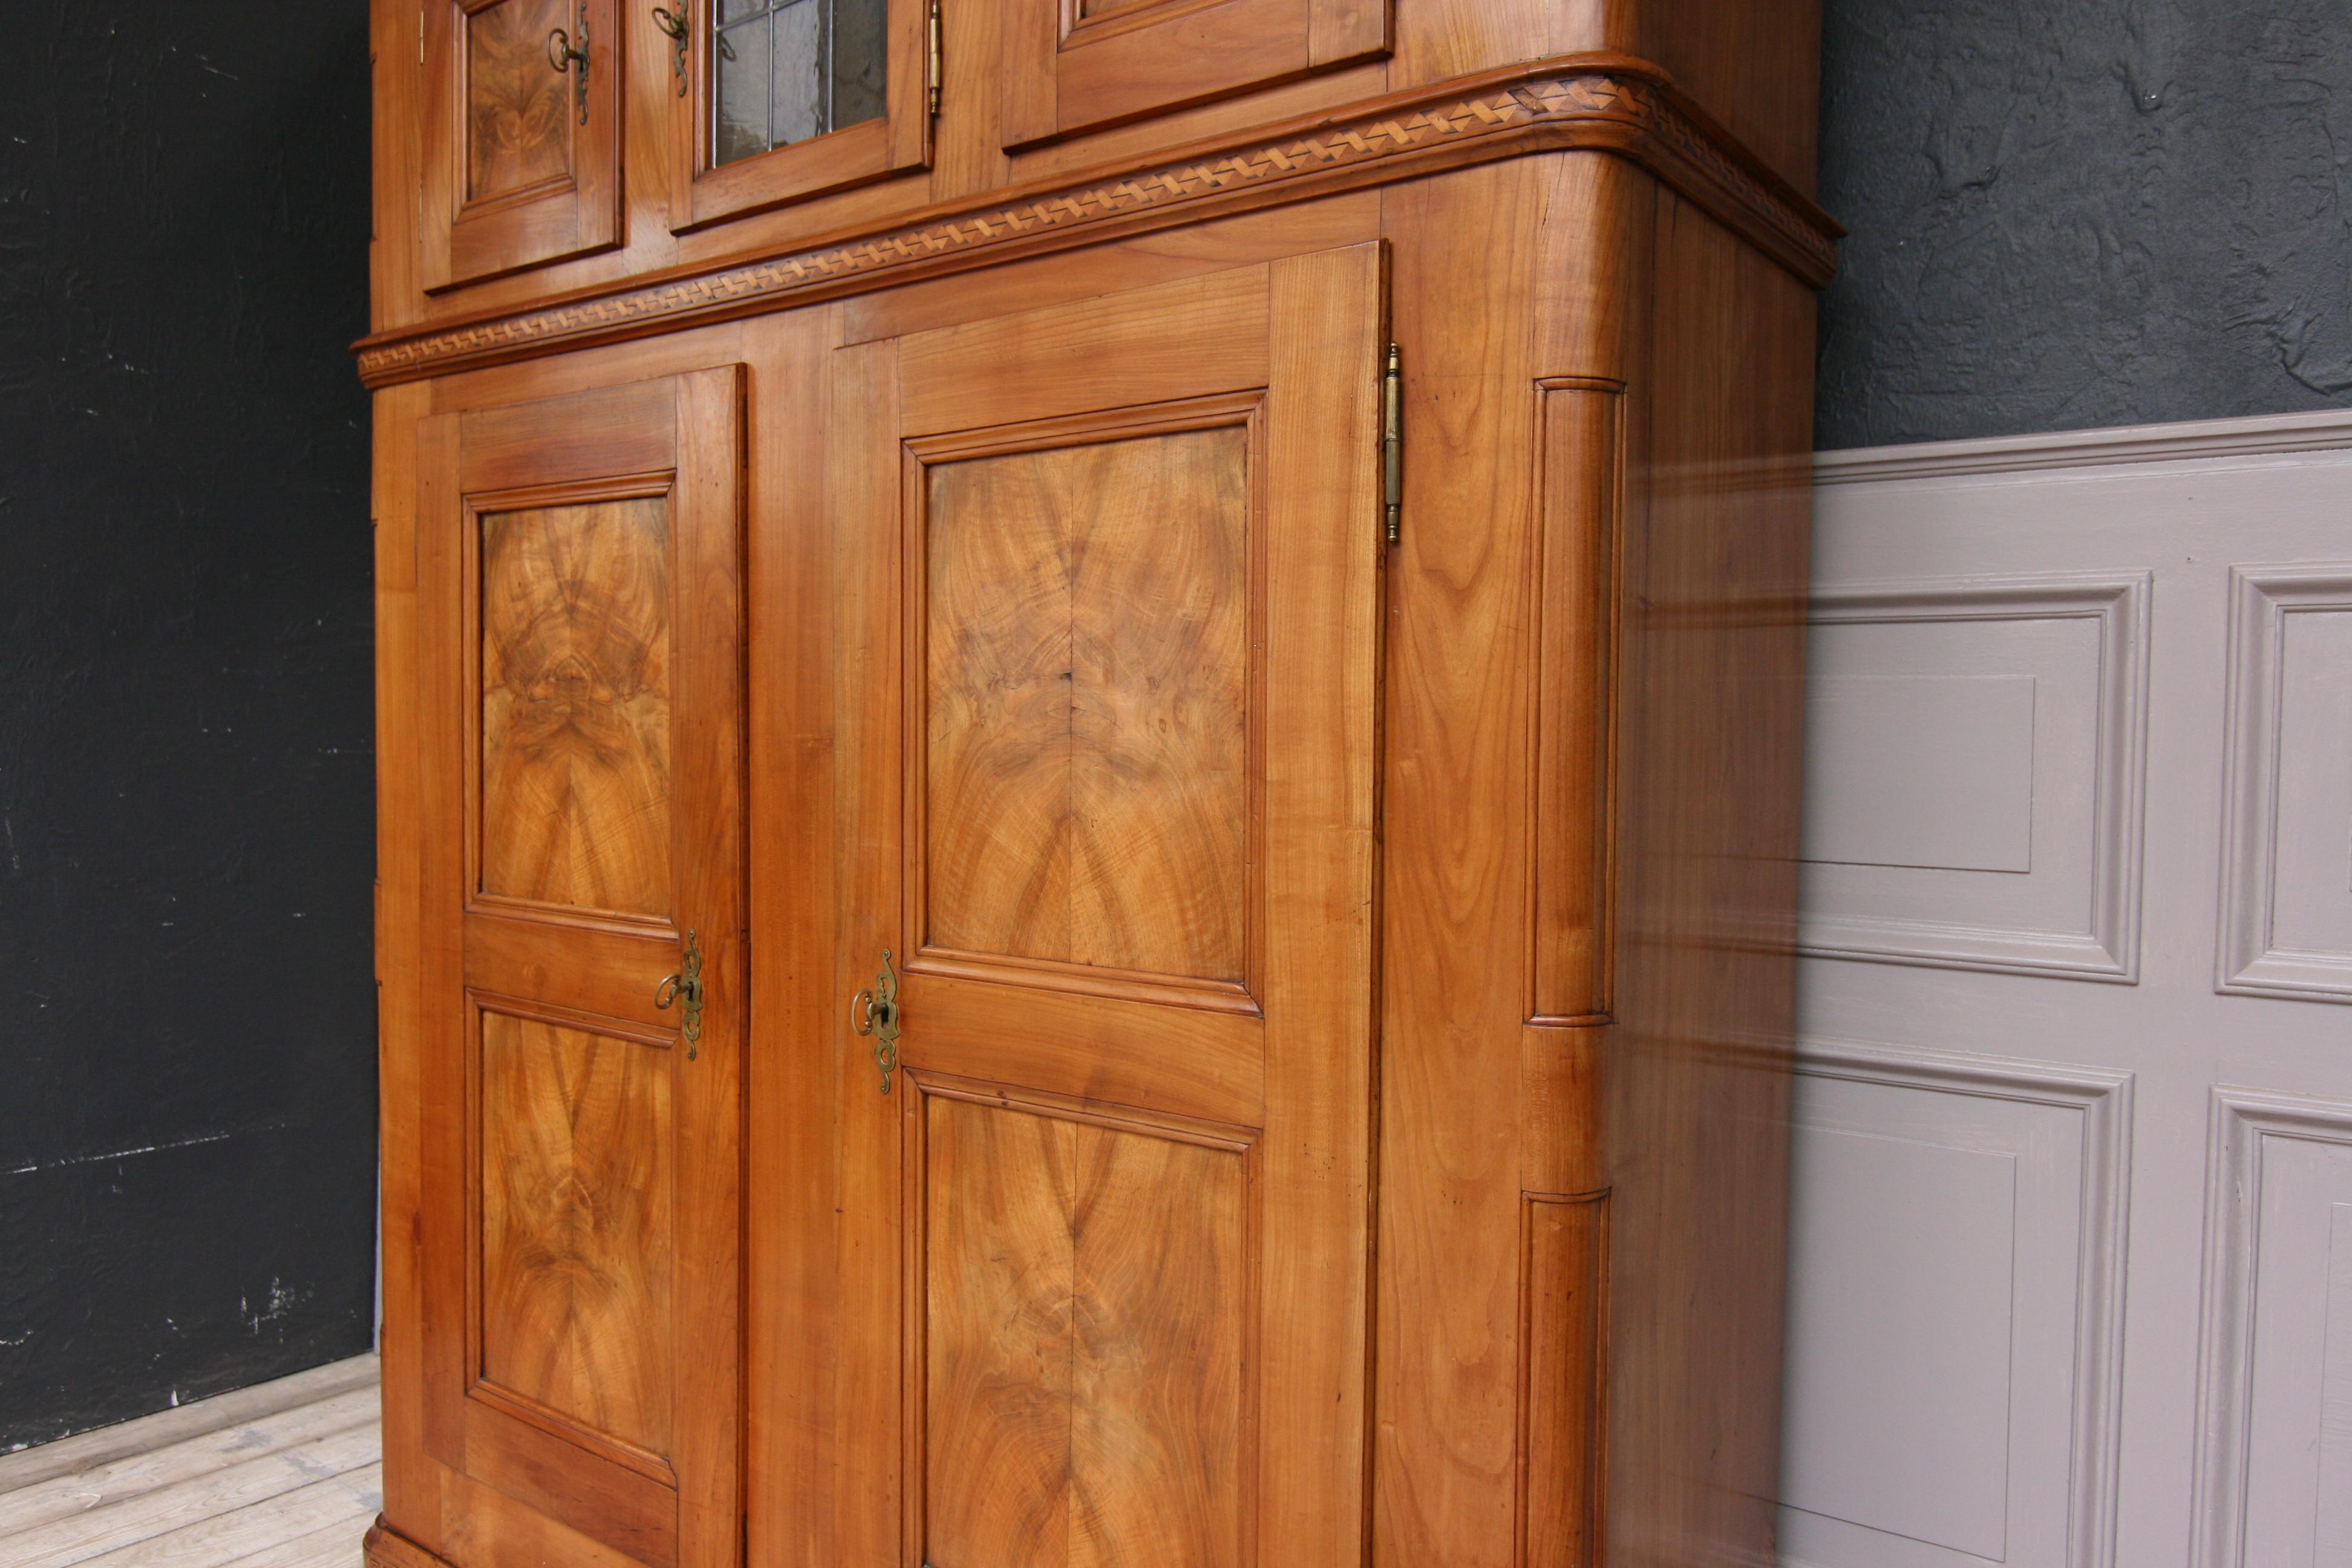 Early 19th Century Swiss Cupboard made of Cherry Wood with Marquetry (Obstholz)